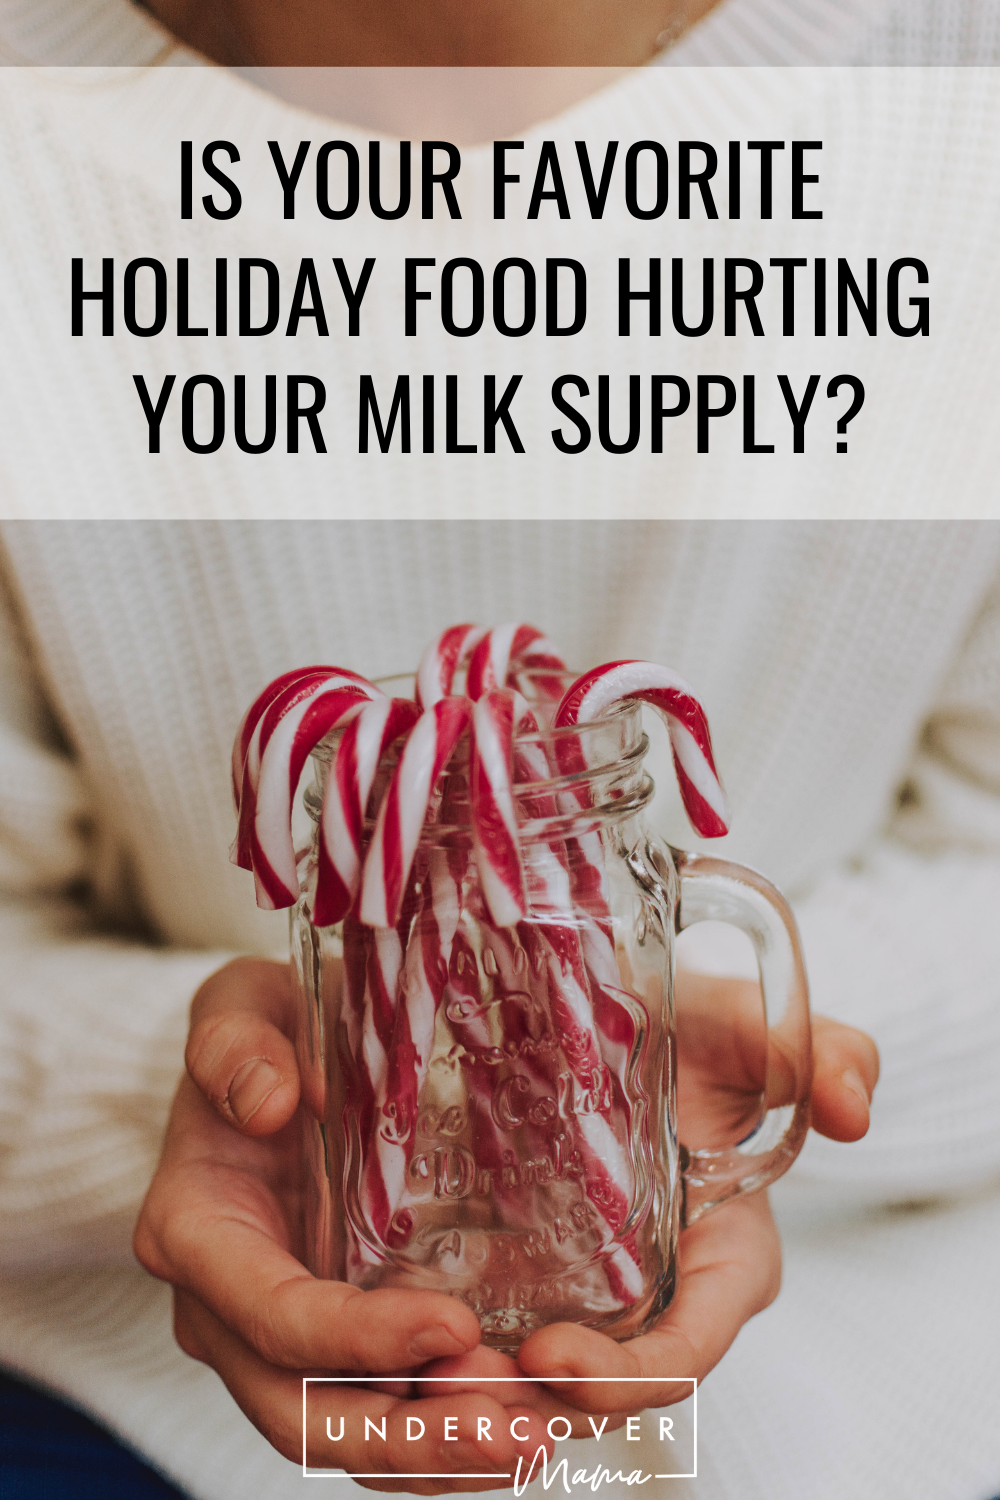 Holiday Foods That Could Effect Your Milk Supply